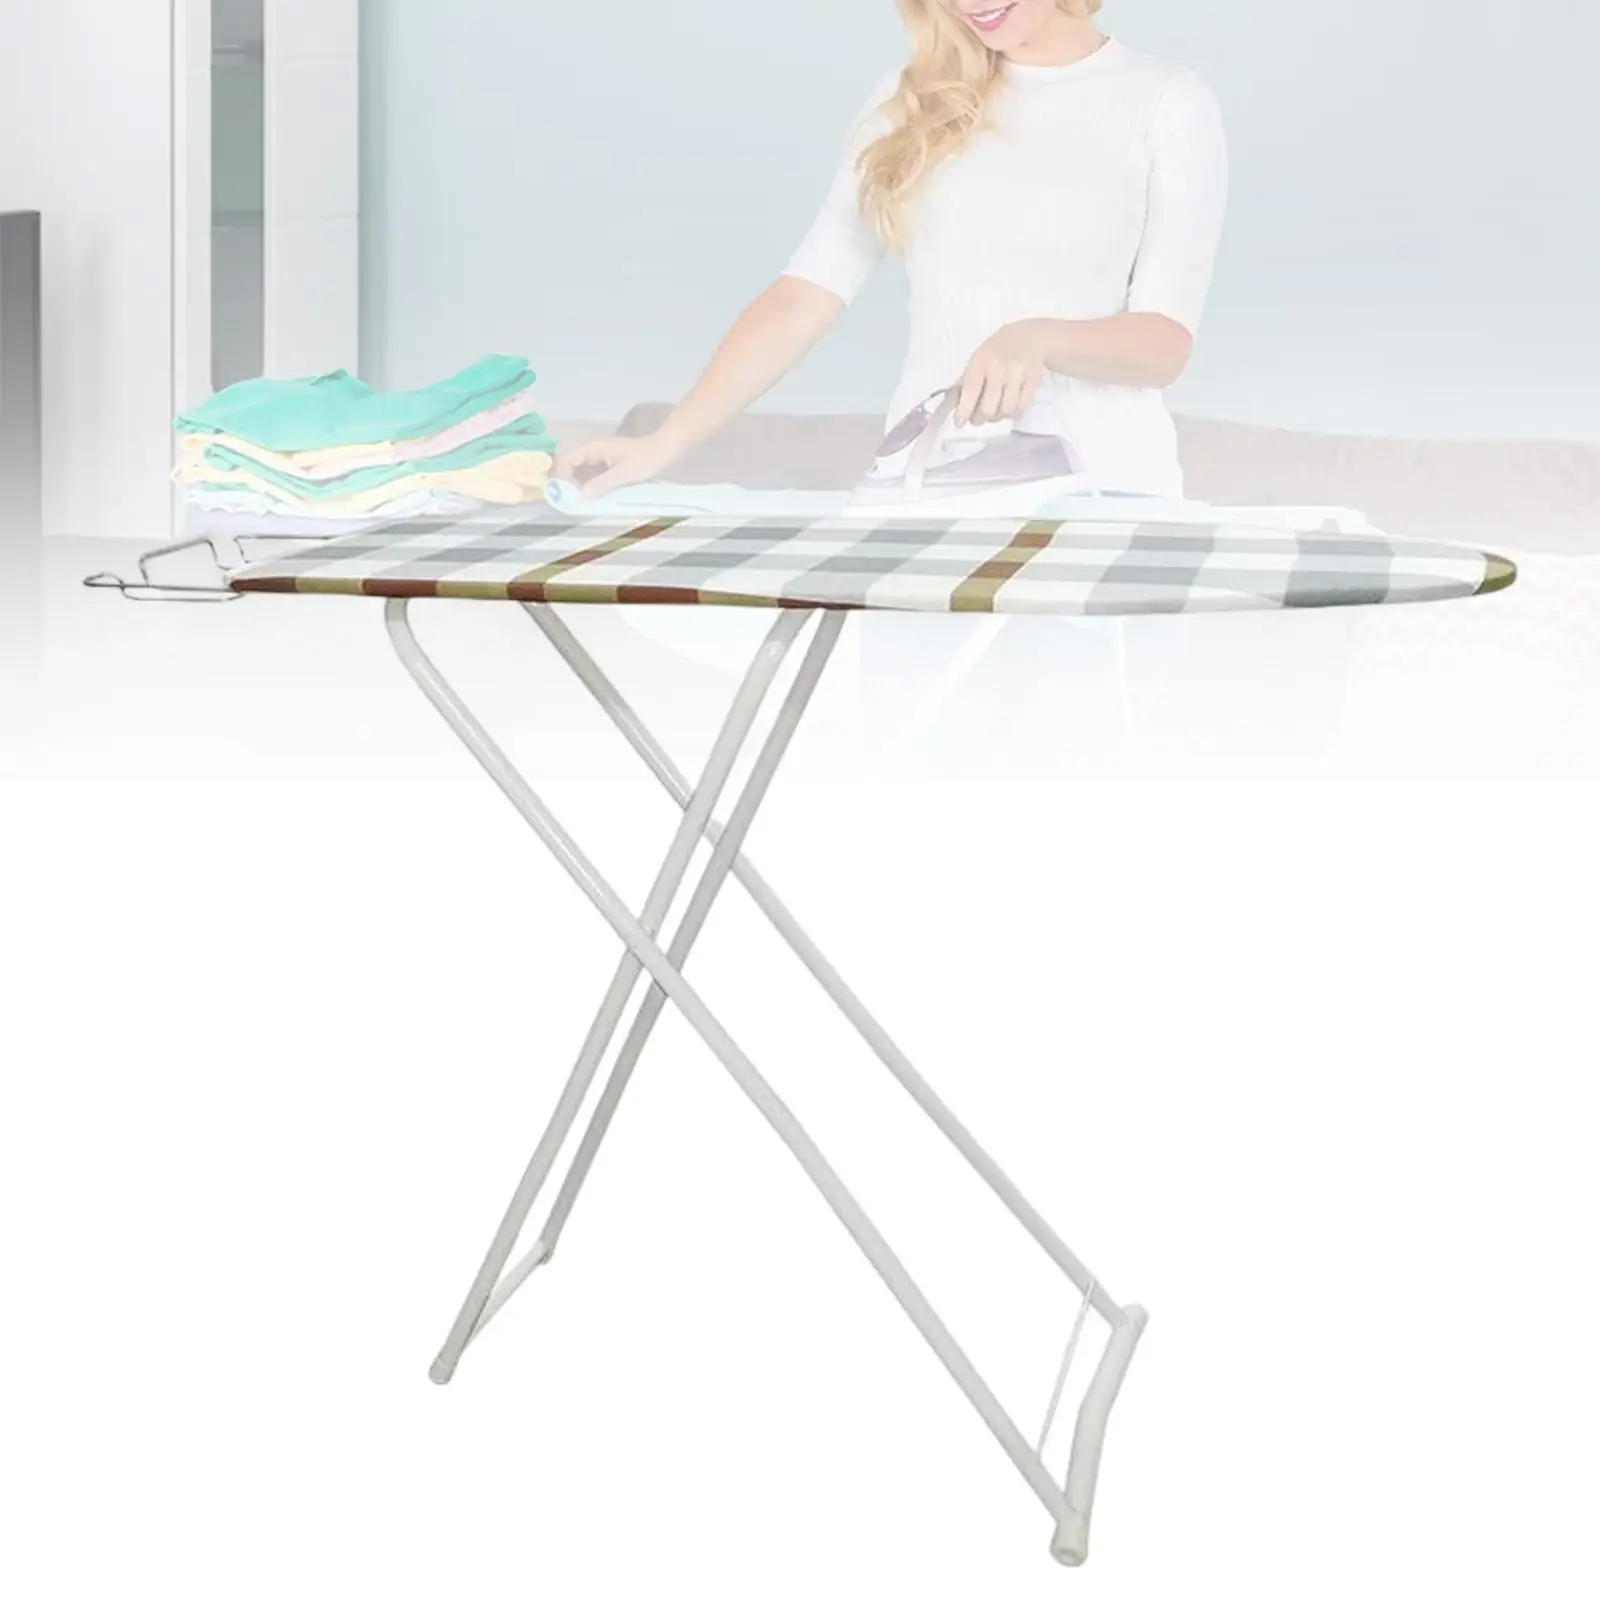 Folding Ironing Board,Easily Folds for Convenient Storage, Perfect for Traveling, RVs and Campers